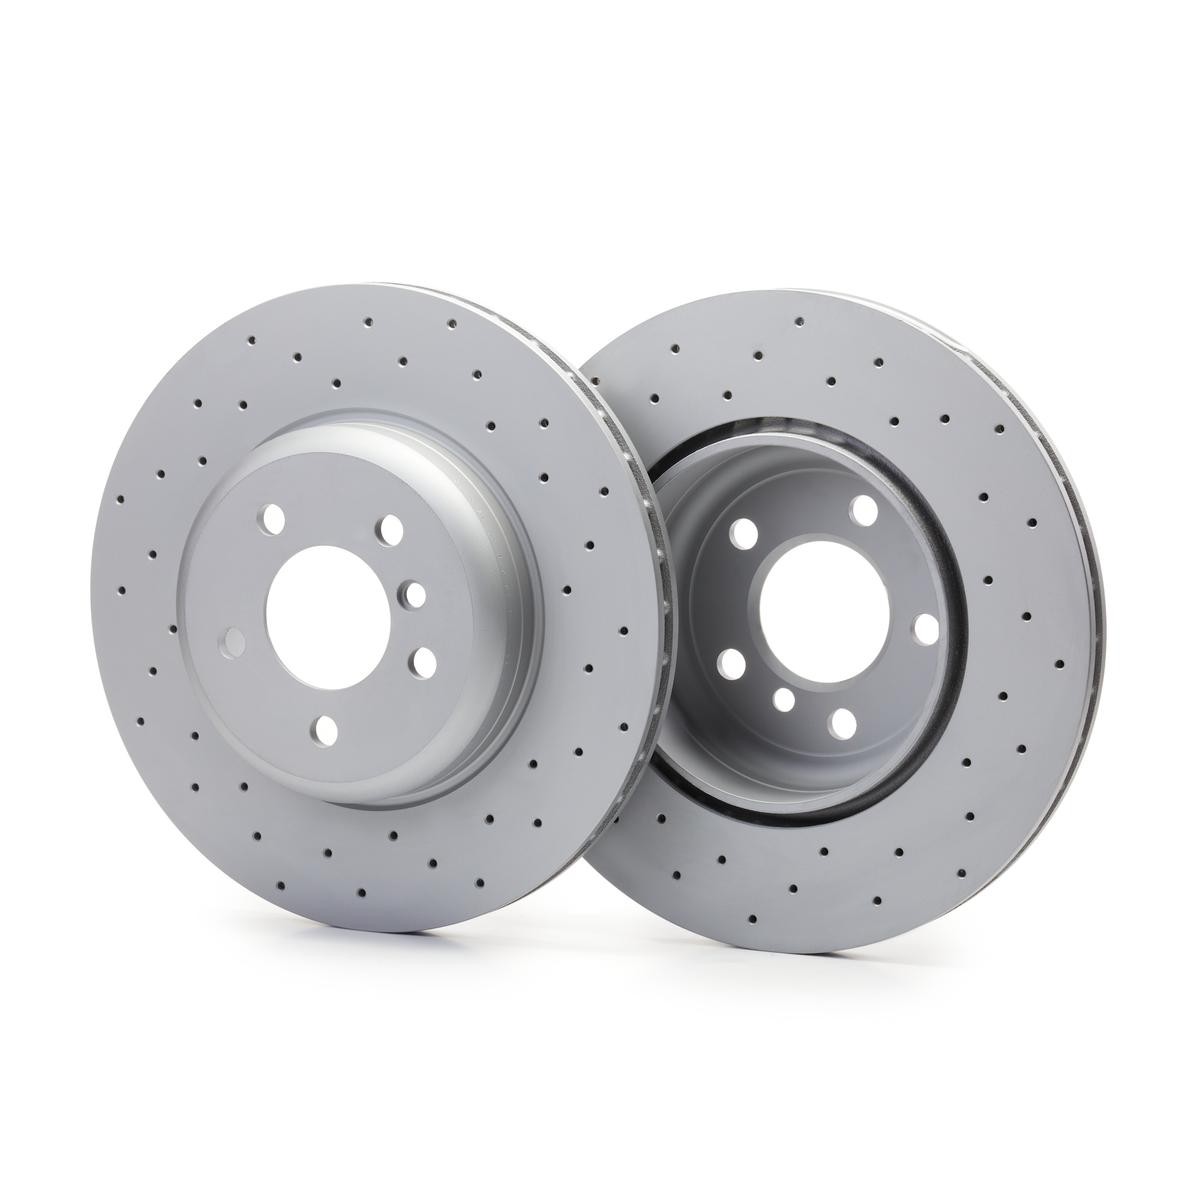 ZIMMERMANN 150.3480.52 Brake rotor 345x24mm, 6/5, 5x120, internally vented, Perforated, Coated, High-carbon